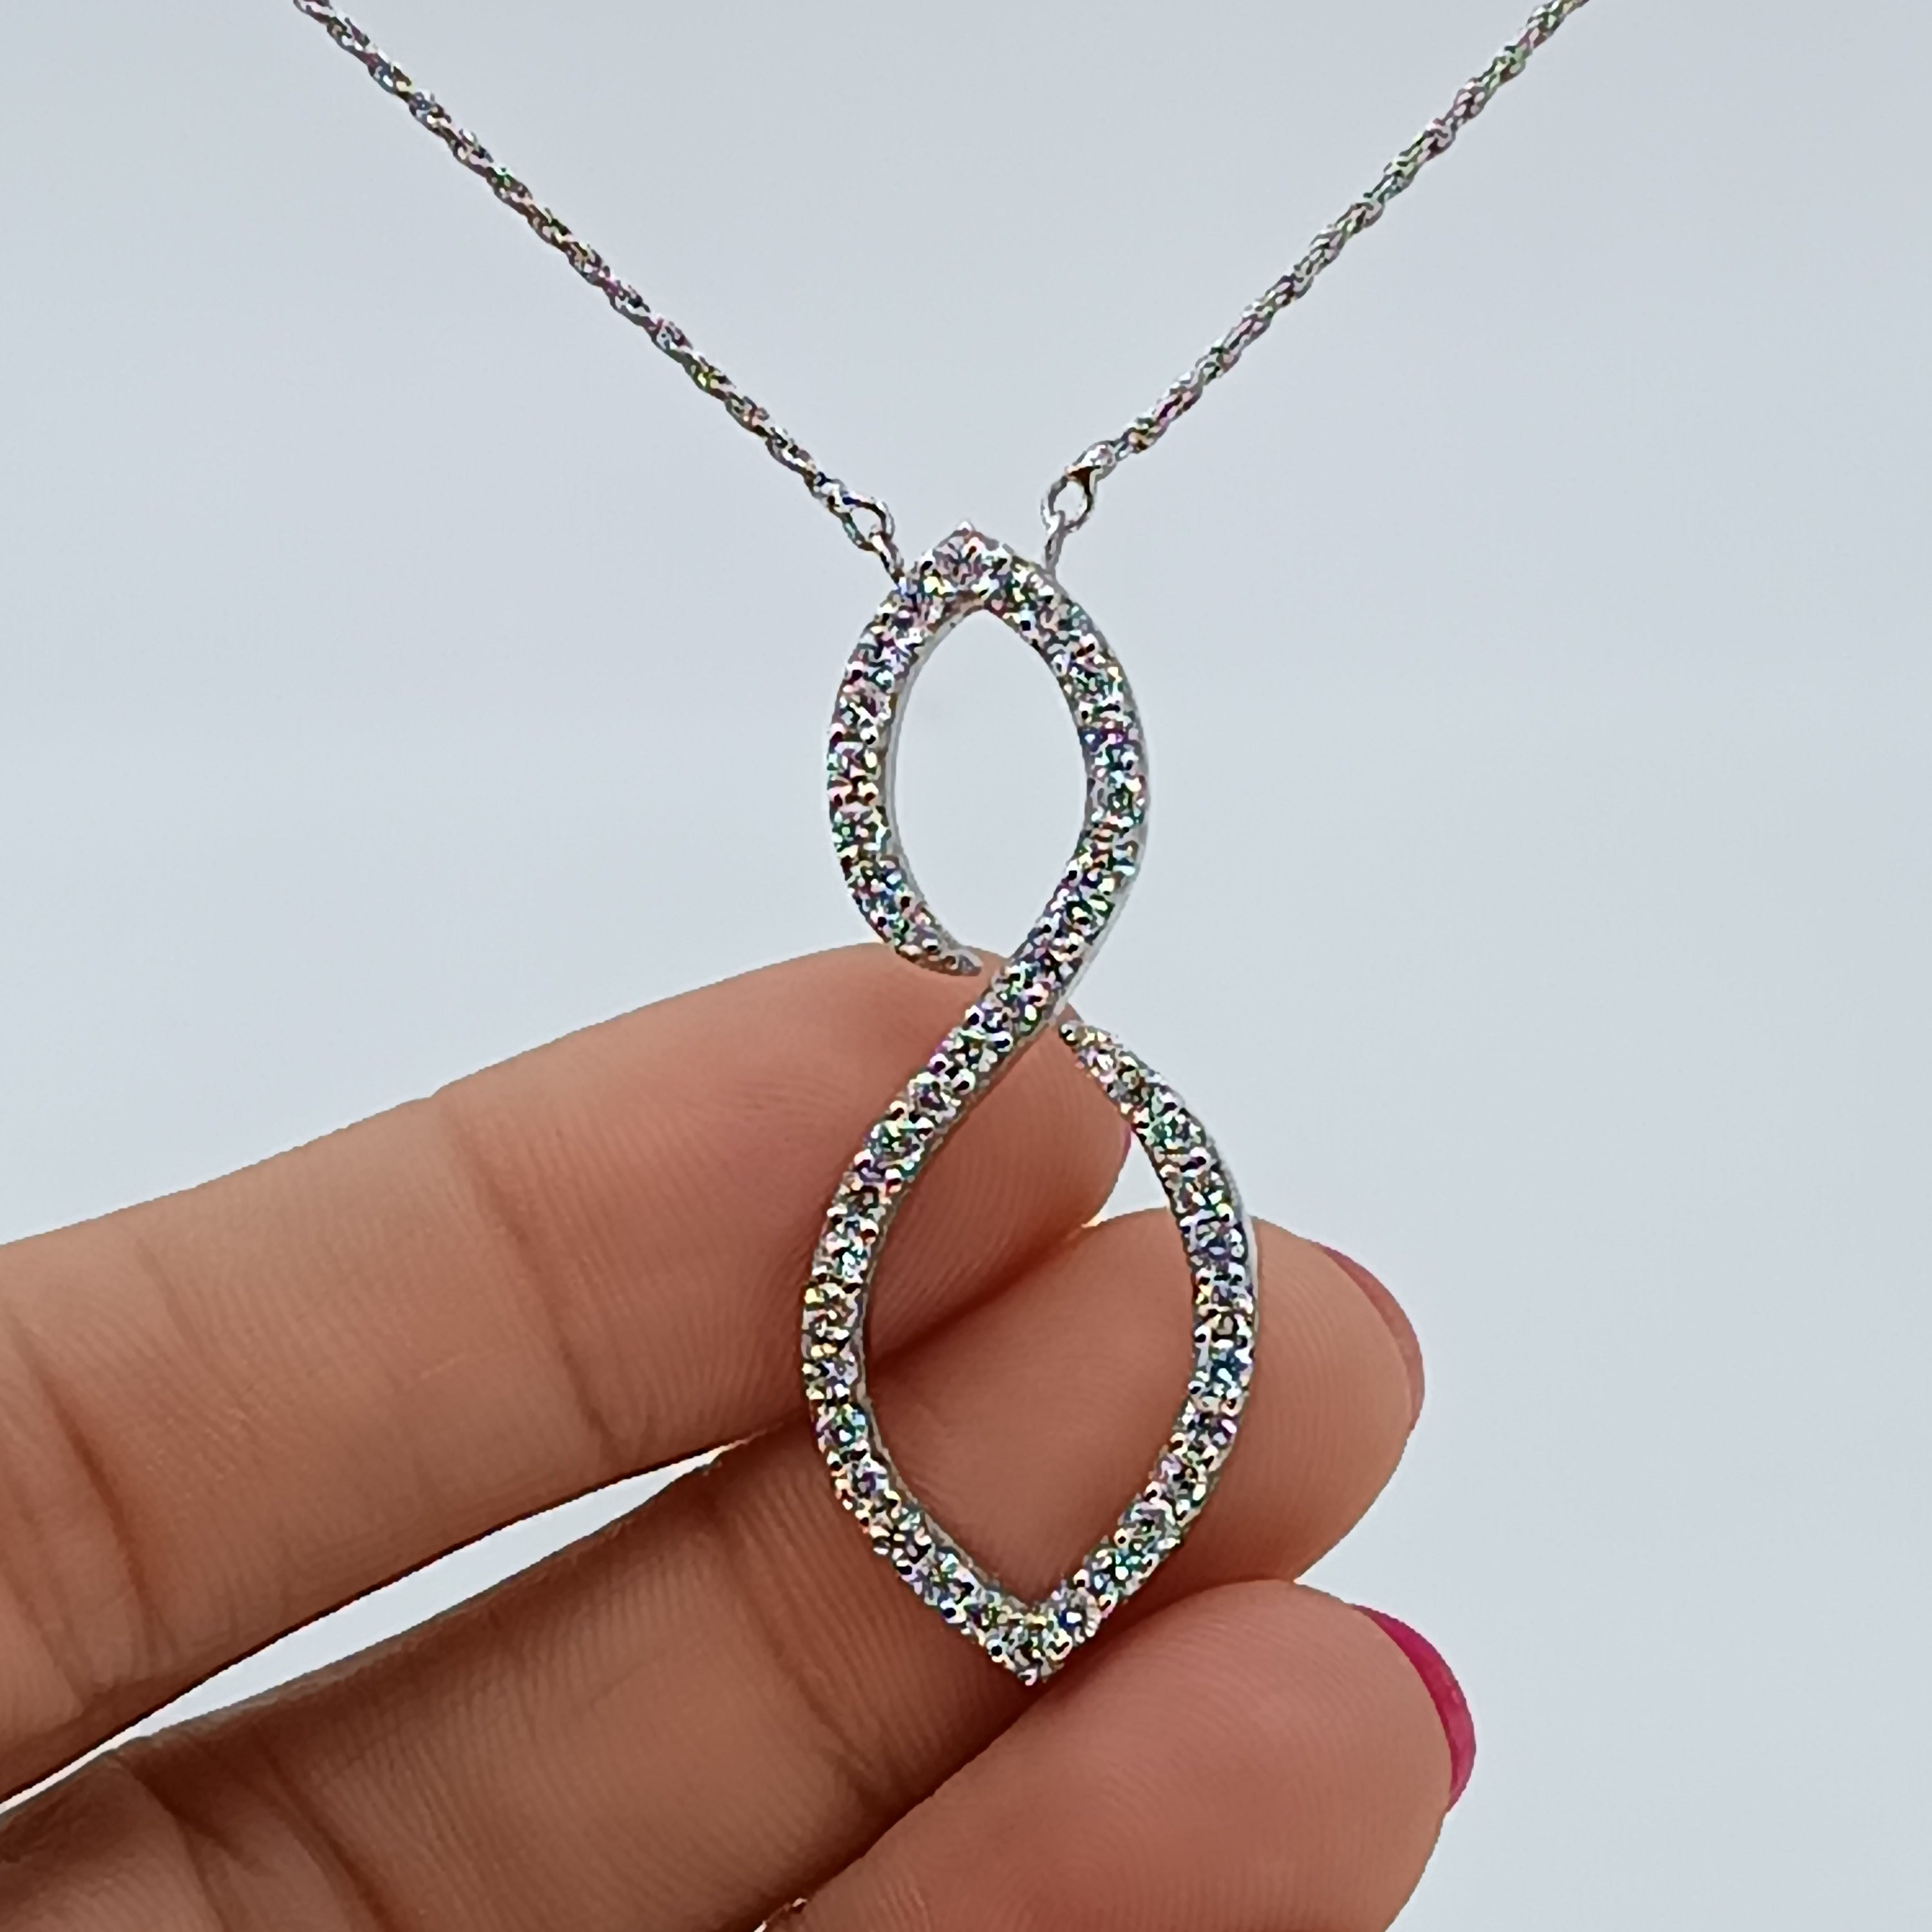 1.23 Carat Vs G Diamonds on 18 Carat White Gold Pendant the Object Weighs 10.29